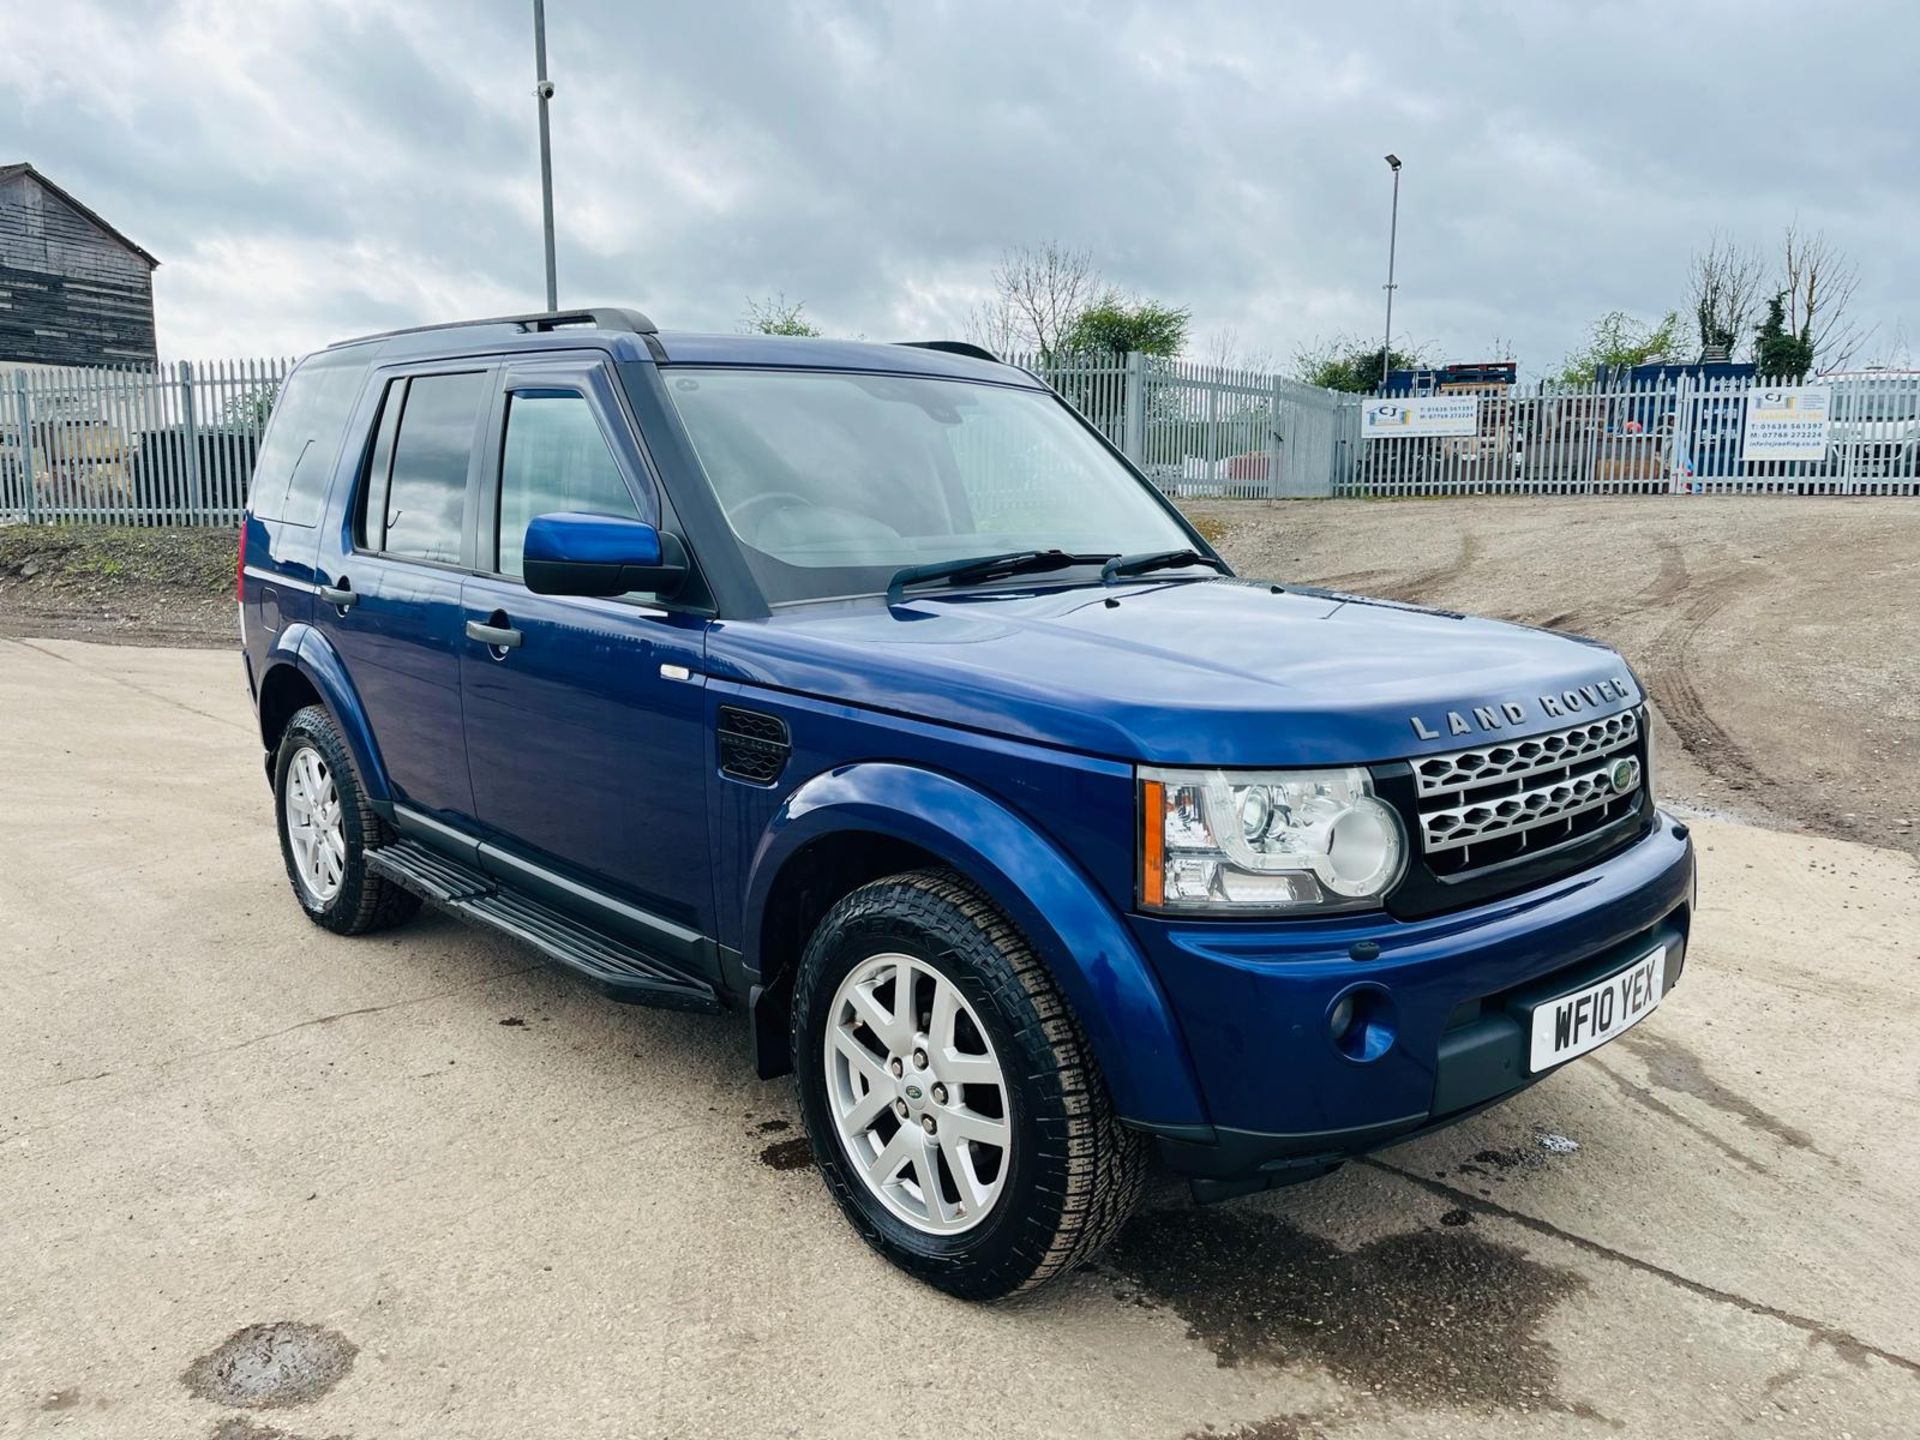 ** ON SALE ** Land Rover Discovery 4 2.7 TDV6 Commercial Van Auto -A/C-Sat Nav-Bluetooth Handsfree